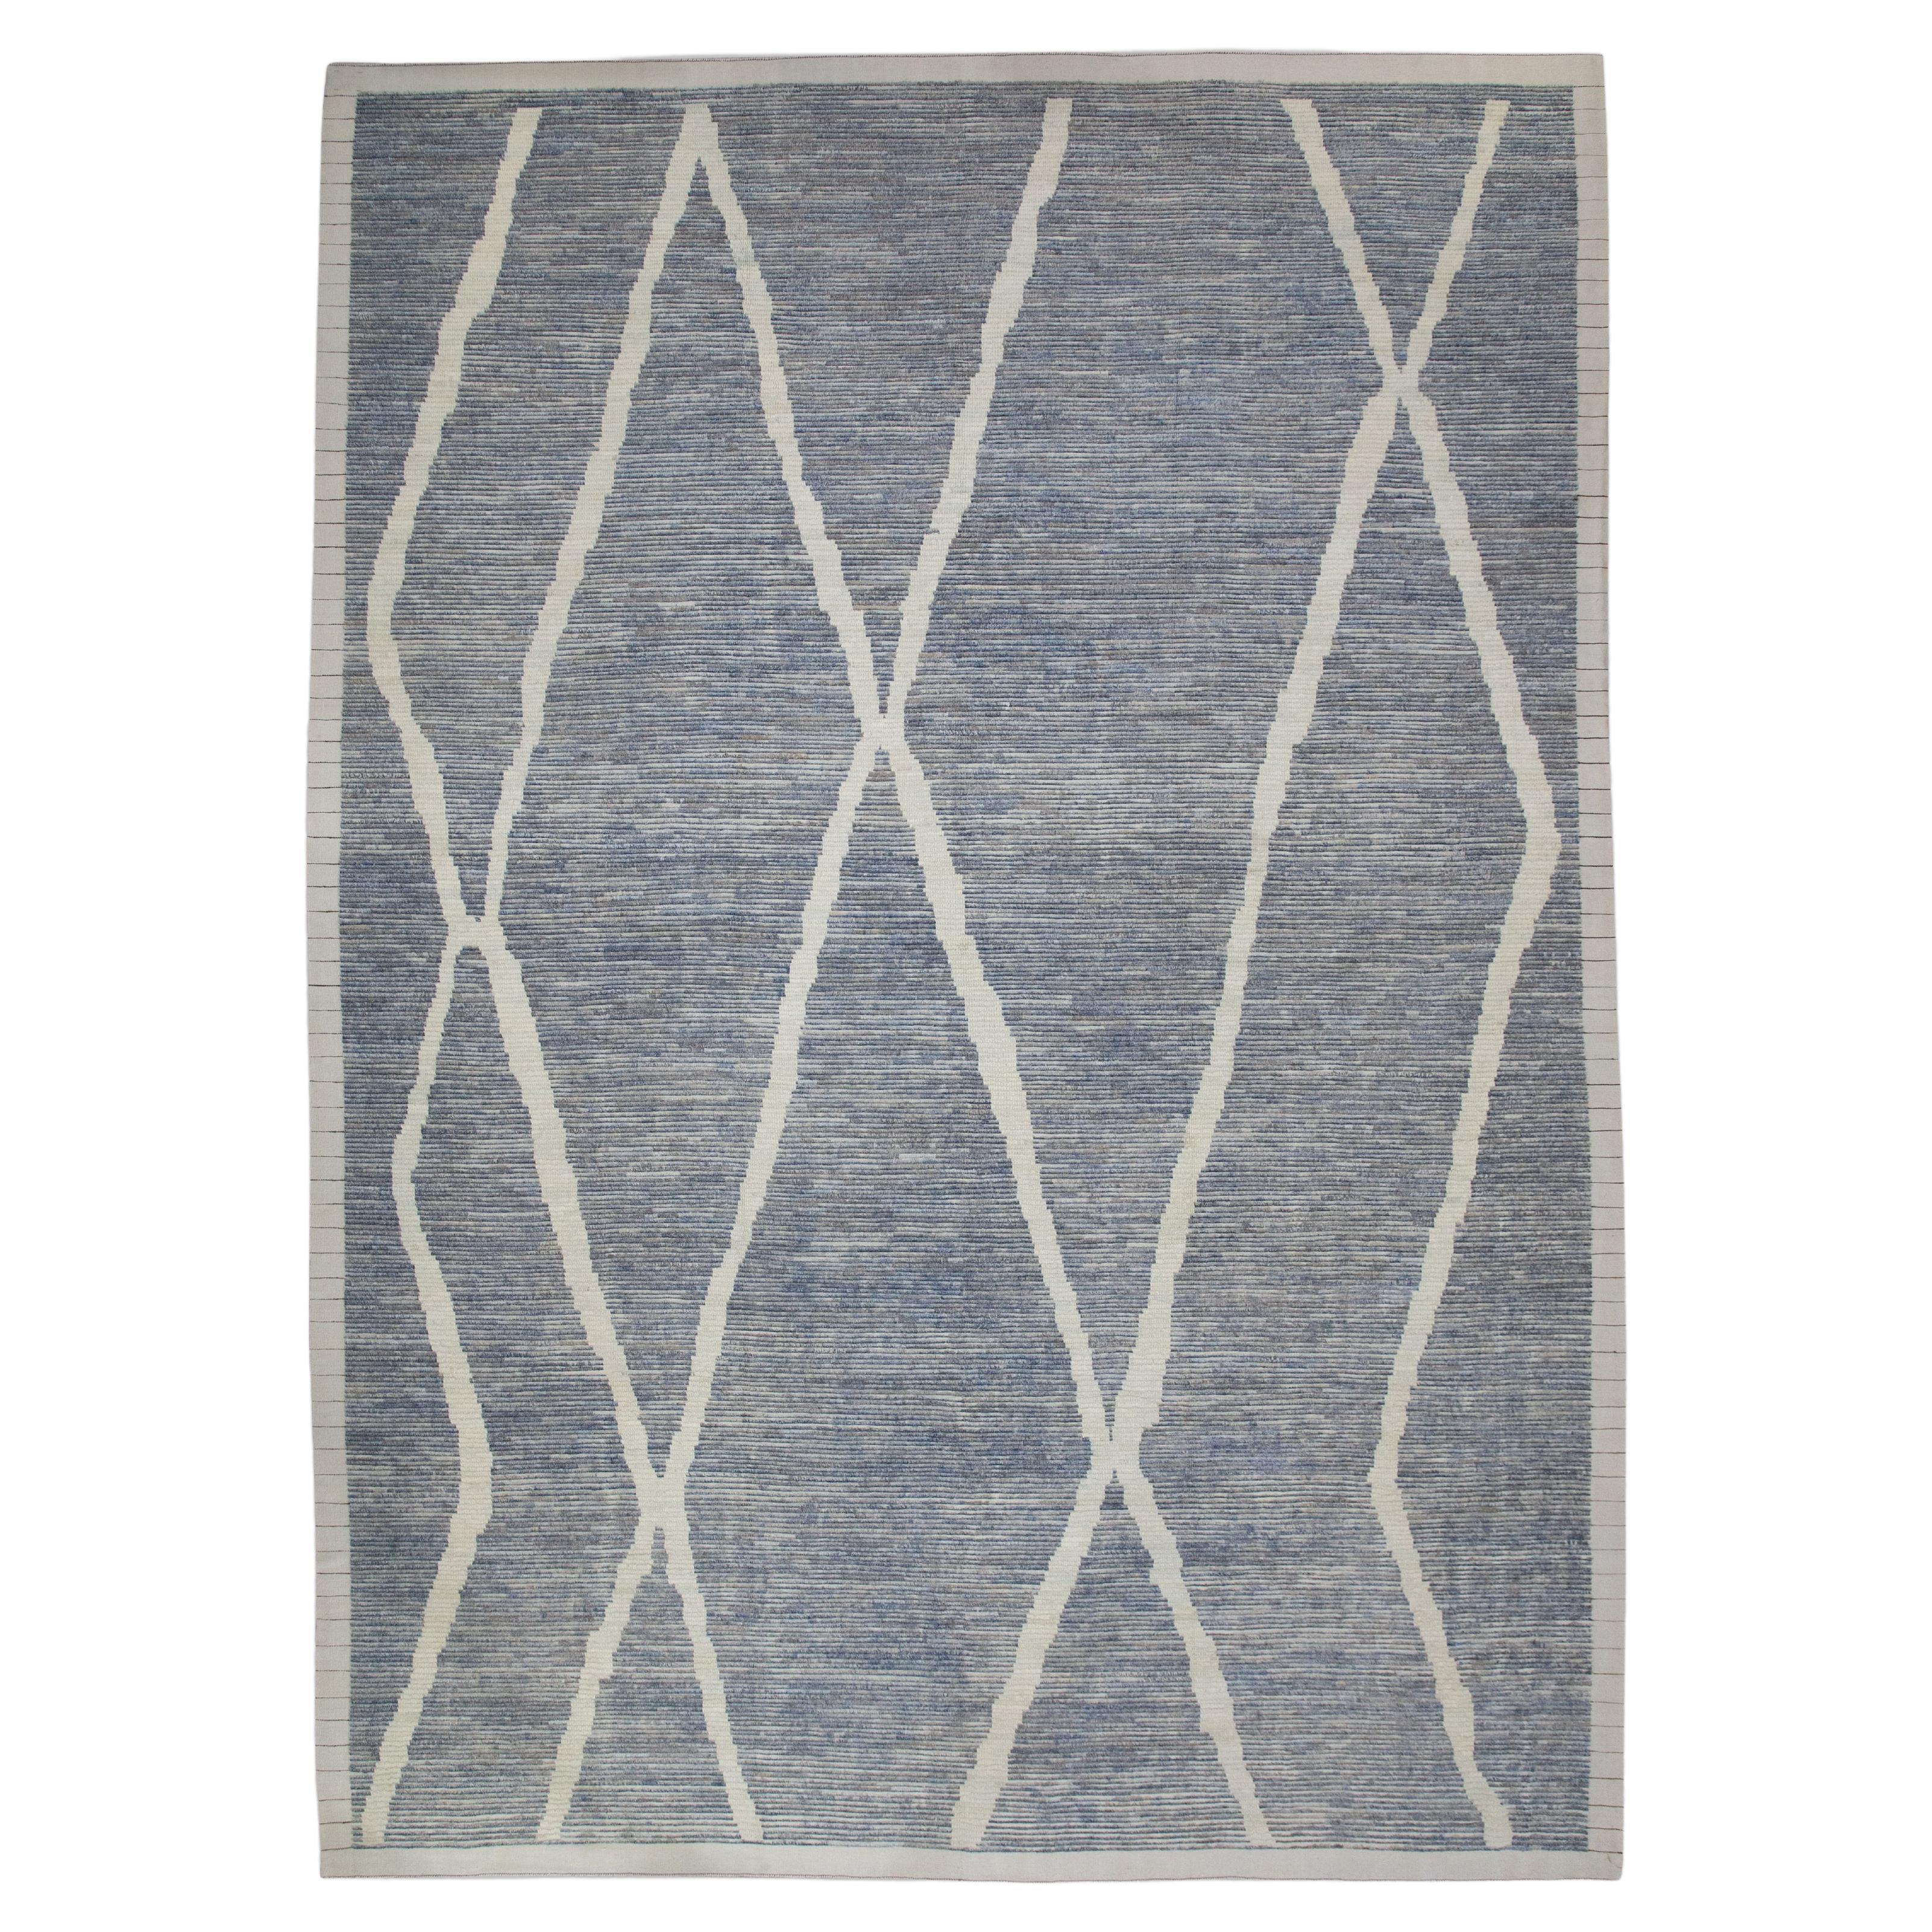 Blue & Gray 21st Century Modern Moroccan Style Wool Rug 11'3" X 15'11" For Sale